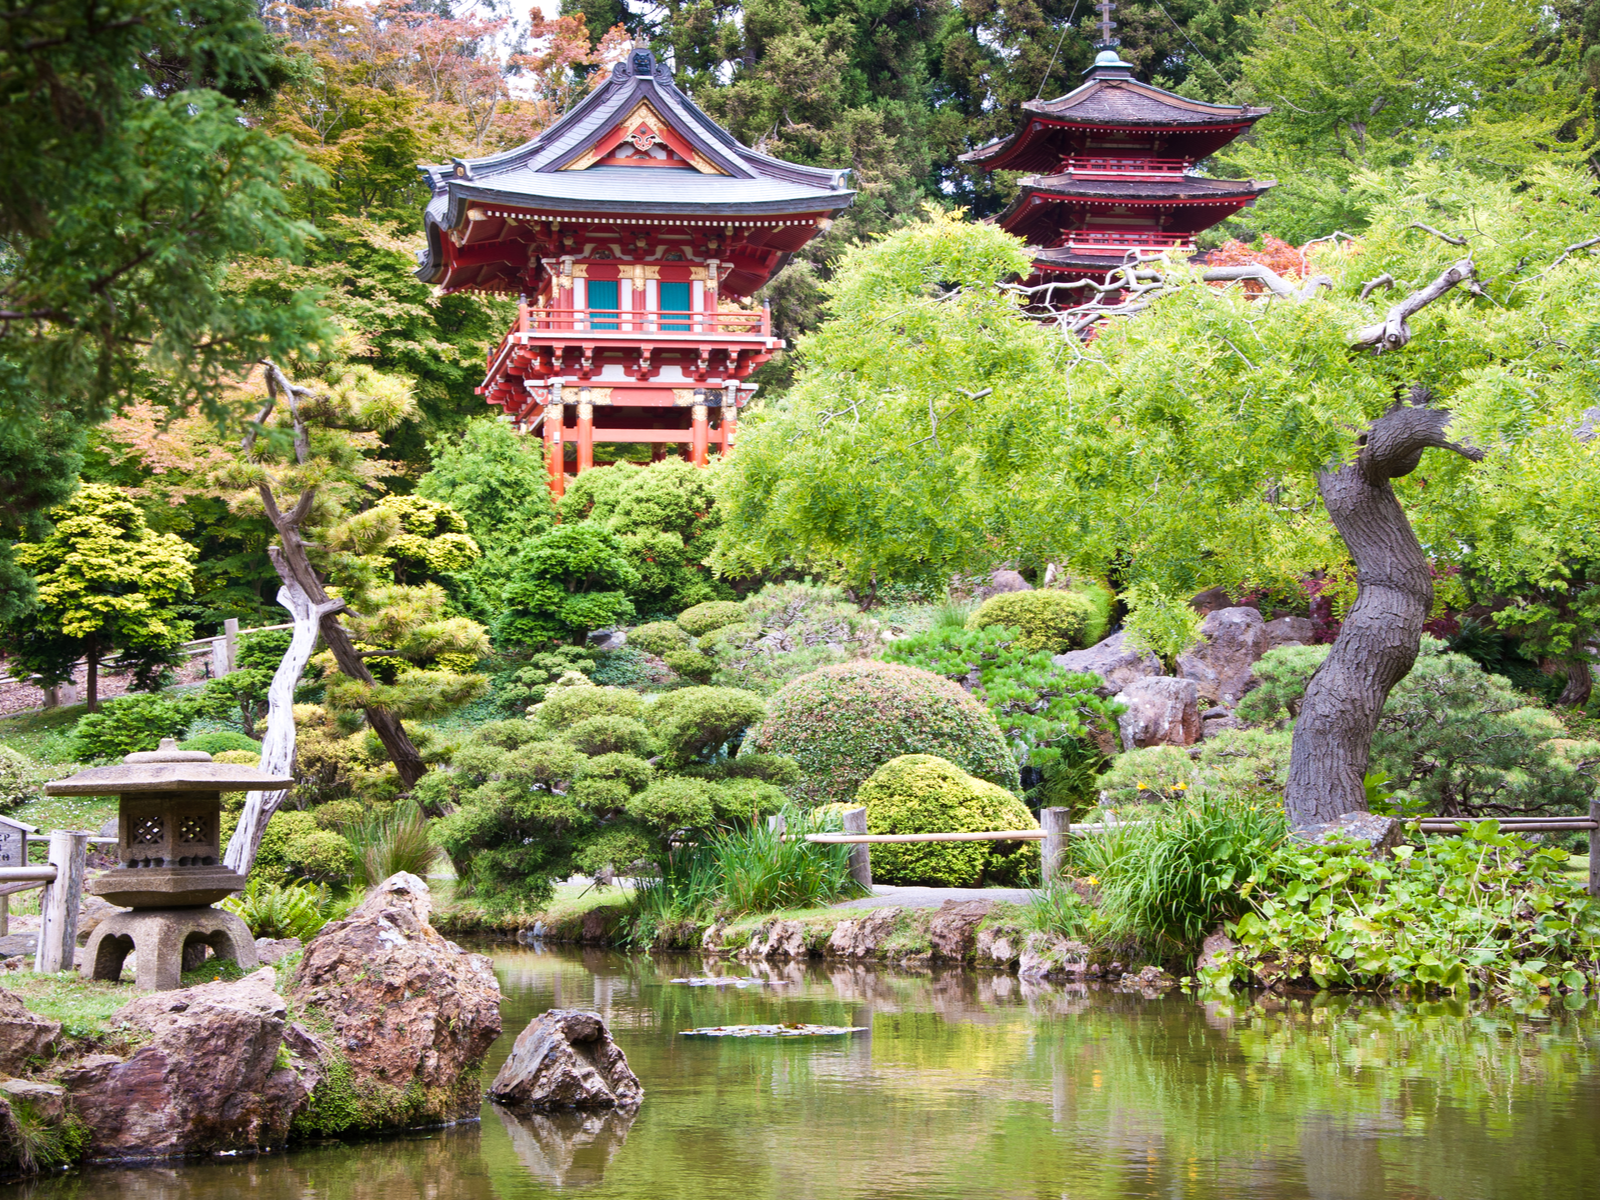 Two red Pagodas peaking over trees and bushes near the pond at The Japanese Tea Garden in Golden Gate Park, one of the best places to visit in San Francisco